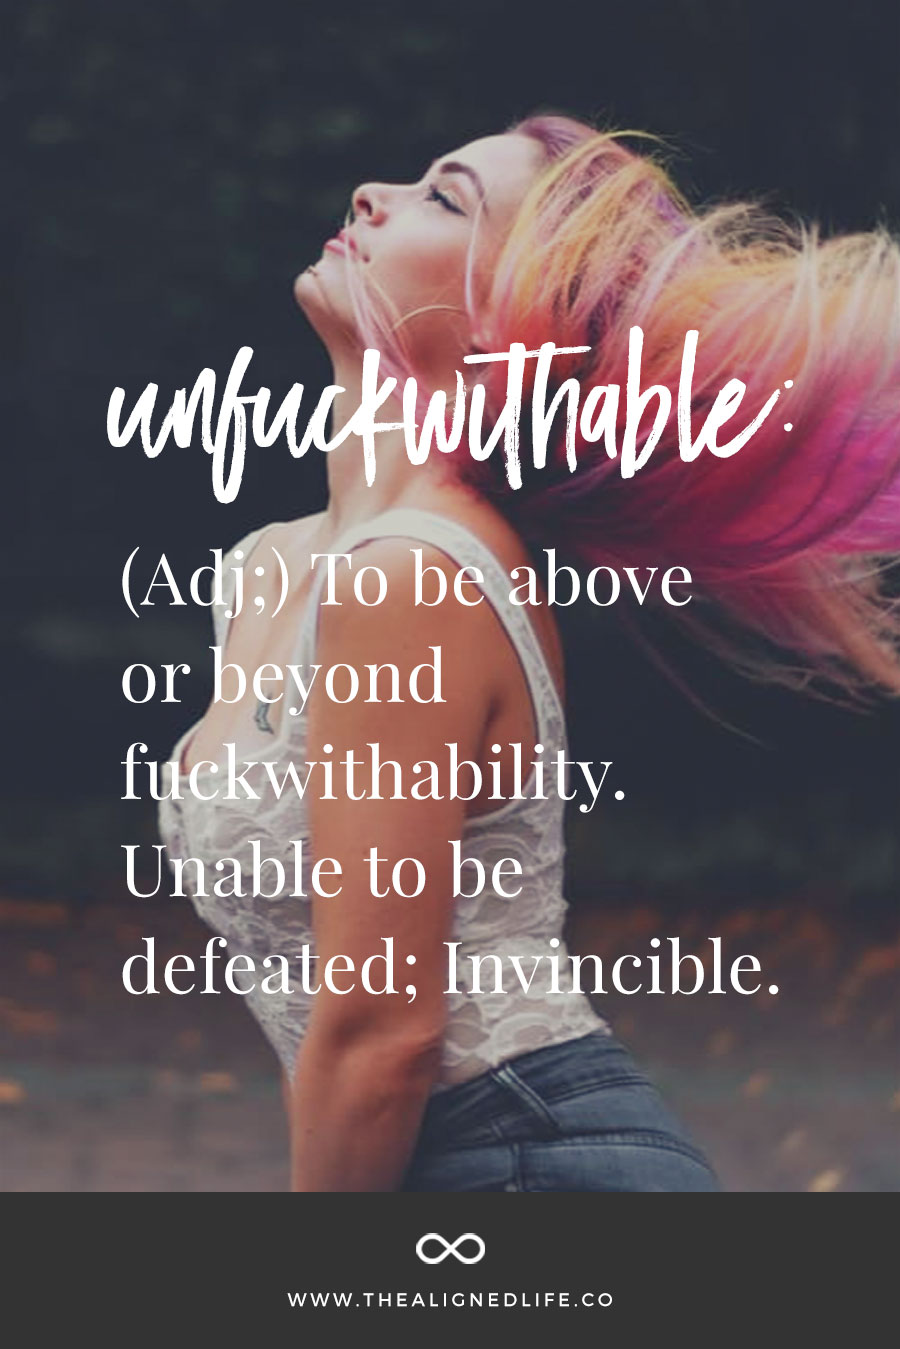 How To Become Unfuckwithable - to be above or beyond fuckwithability